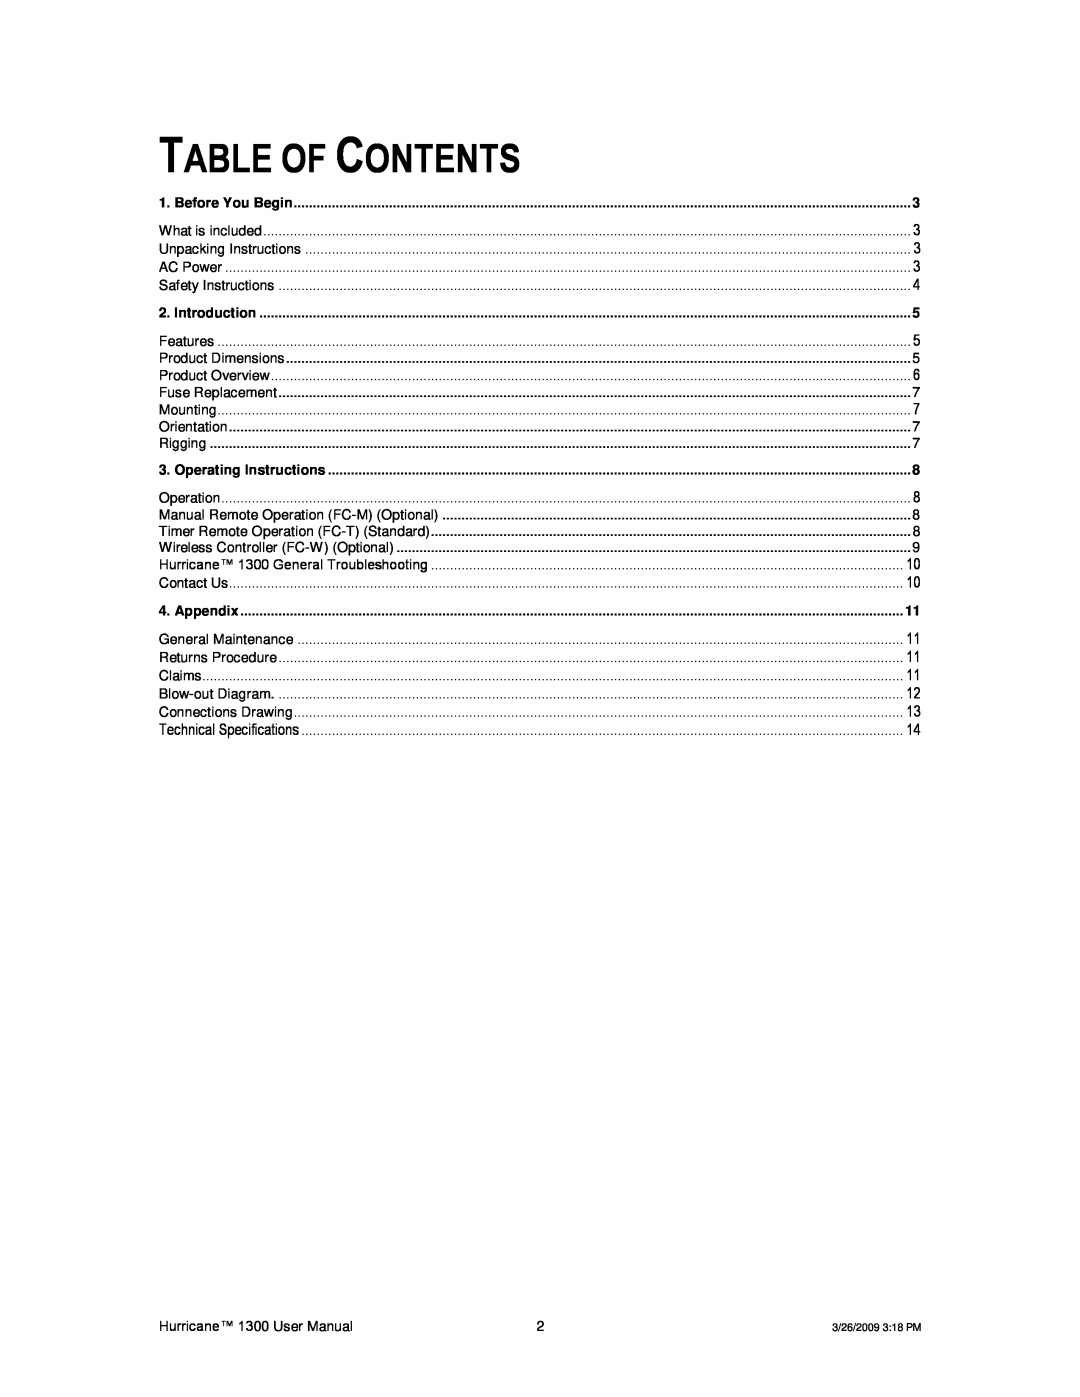 Chauvet Hurricane 1300 user manual Table Of Contents 